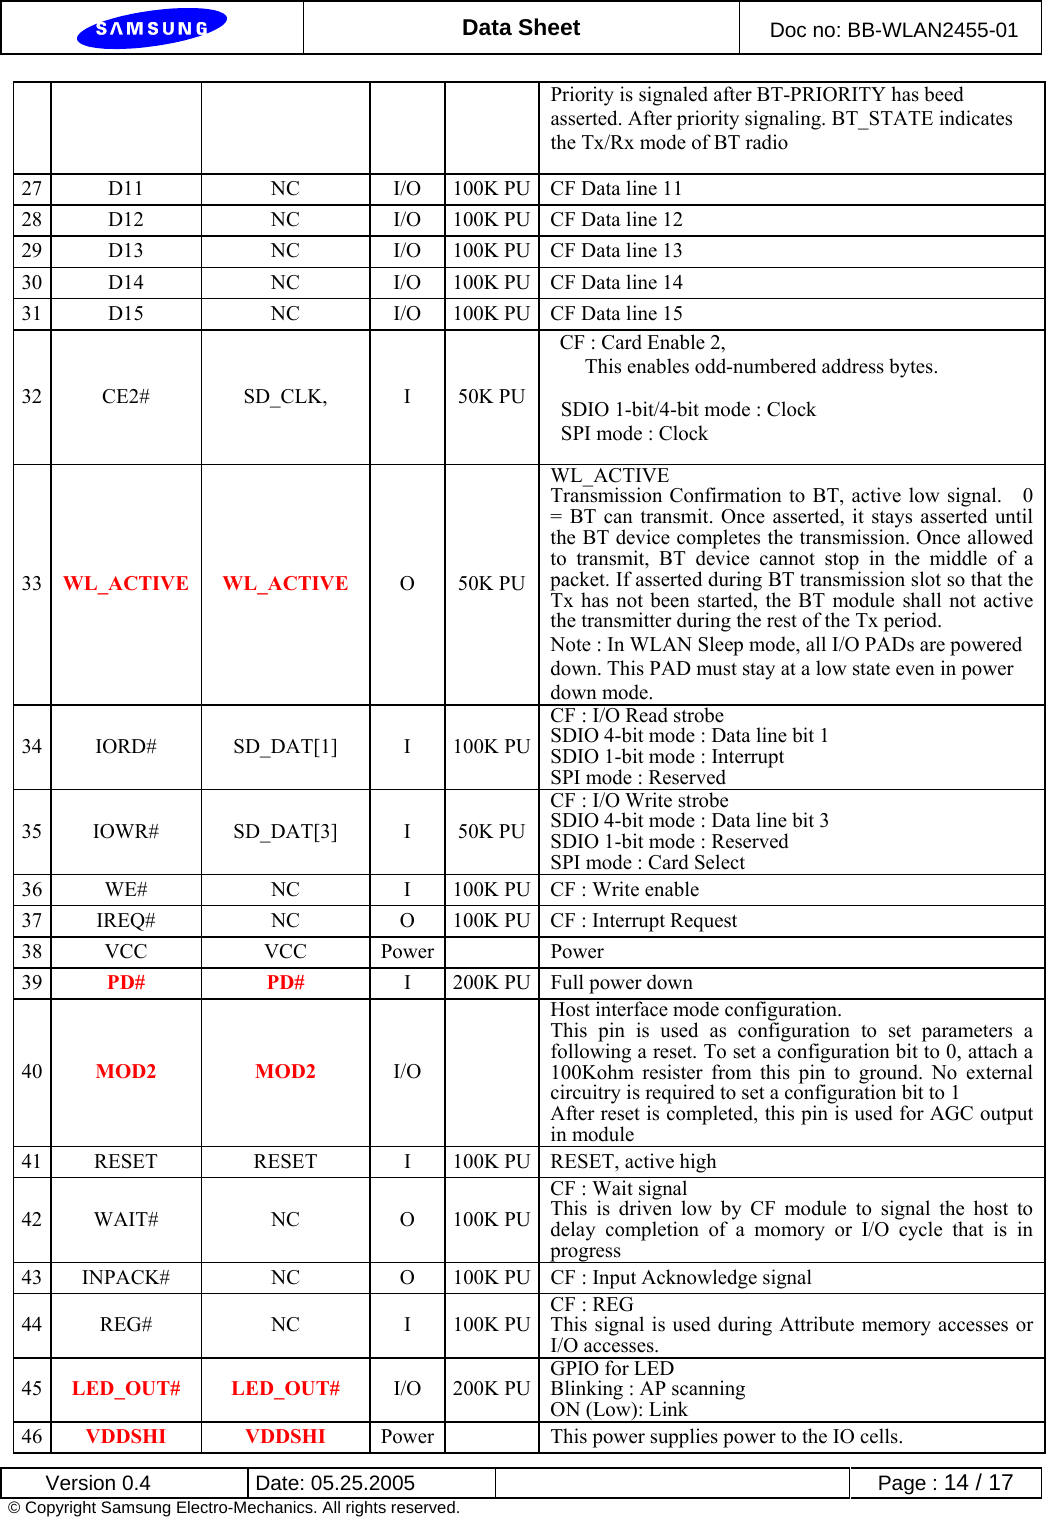  Data Sheet  Doc no: BB-WLAN2455-01  Version 0.4  Date: 05.25.2005      Page : 14 / 17 © Copyright Samsung Electro-Mechanics. All rights reserved. Priority is signaled after BT-PRIORITY has beed asserted. After priority signaling. BT_STATE indicates the Tx/Rx mode of BT radio 27  D11  NC  I/O  100K PU CF Data line 11 28  D12  NC  I/O  100K PU CF Data line 12 29  D13  NC  I/O  100K PU CF Data line 13 30  D14  NC  I/O  100K PU CF Data line 14 31  D15  NC  I/O  100K PU CF Data line 15 32 CE2#  SD_CLK,   I 50K PU CF : Card Enable 2,   This enables odd-numbered address bytes. SDIO 1-bit/4-bit mode : Clock SPI mode : Clock 33  WL_ACTIVE WL_ACTIVE O 50K PUWL_ACTIVE Transmission Confirmation to BT, active low signal.    0 = BT can transmit. Once asserted, it stays asserted until the BT device completes the transmission. Once allowed to transmit, BT device cannot stop in the middle of a packet. If asserted during BT transmission slot so that the Tx has not been started, the BT module shall not active the transmitter during the rest of the Tx period. Note : In WLAN Sleep mode, all I/O PADs are powered down. This PAD must stay at a low state even in power down mode. 34 IORD#  SD_DAT[1]  I 100K PUCF : I/O Read strobe SDIO 4-bit mode : Data line bit 1 SDIO 1-bit mode : Interrupt SPI mode : Reserved 35 IOWR#  SD_DAT[3]  I 50K PUCF : I/O Write strobe SDIO 4-bit mode : Data line bit 3 SDIO 1-bit mode : Reserved SPI mode : Card Select 36  WE#  NC  I  100K PU CF : Write enable 37  IREQ#  NC  O  100K PU CF : Interrupt Request 38 VCC  VCC  Power  Power 39  PD# PD#  I  200K PU Full power down 40  MOD2 MOD2 I/O  Host interface mode configuration.   This pin is used as configuration to set parameters a following a reset. To set a configuration bit to 0, attach a 100Kohm resister from this pin to ground. No external circuitry is required to set a configuration bit to 1 After reset is completed, this pin is used for AGC output in module 41  RESET  RESET  I  100K PU RESET, active high 42 WAIT#  NC  O 100K PUCF : Wait signal This is driven low by CF module to signal the host to delay completion of a momory or I/O cycle that is in progress 43  INPACK#  NC  O  100K PU CF : Input Acknowledge signal 44 REG#  NC  I 100K PUCF : REG This signal is used during Attribute memory accesses or I/O accesses. 45  LED_OUT# LED_OUT# I/O 200K PUGPIO for LED Blinking : AP scanning ON (Low): Link 46  VDDSHI VDDSHI  Power   This power supplies power to the IO cells. 